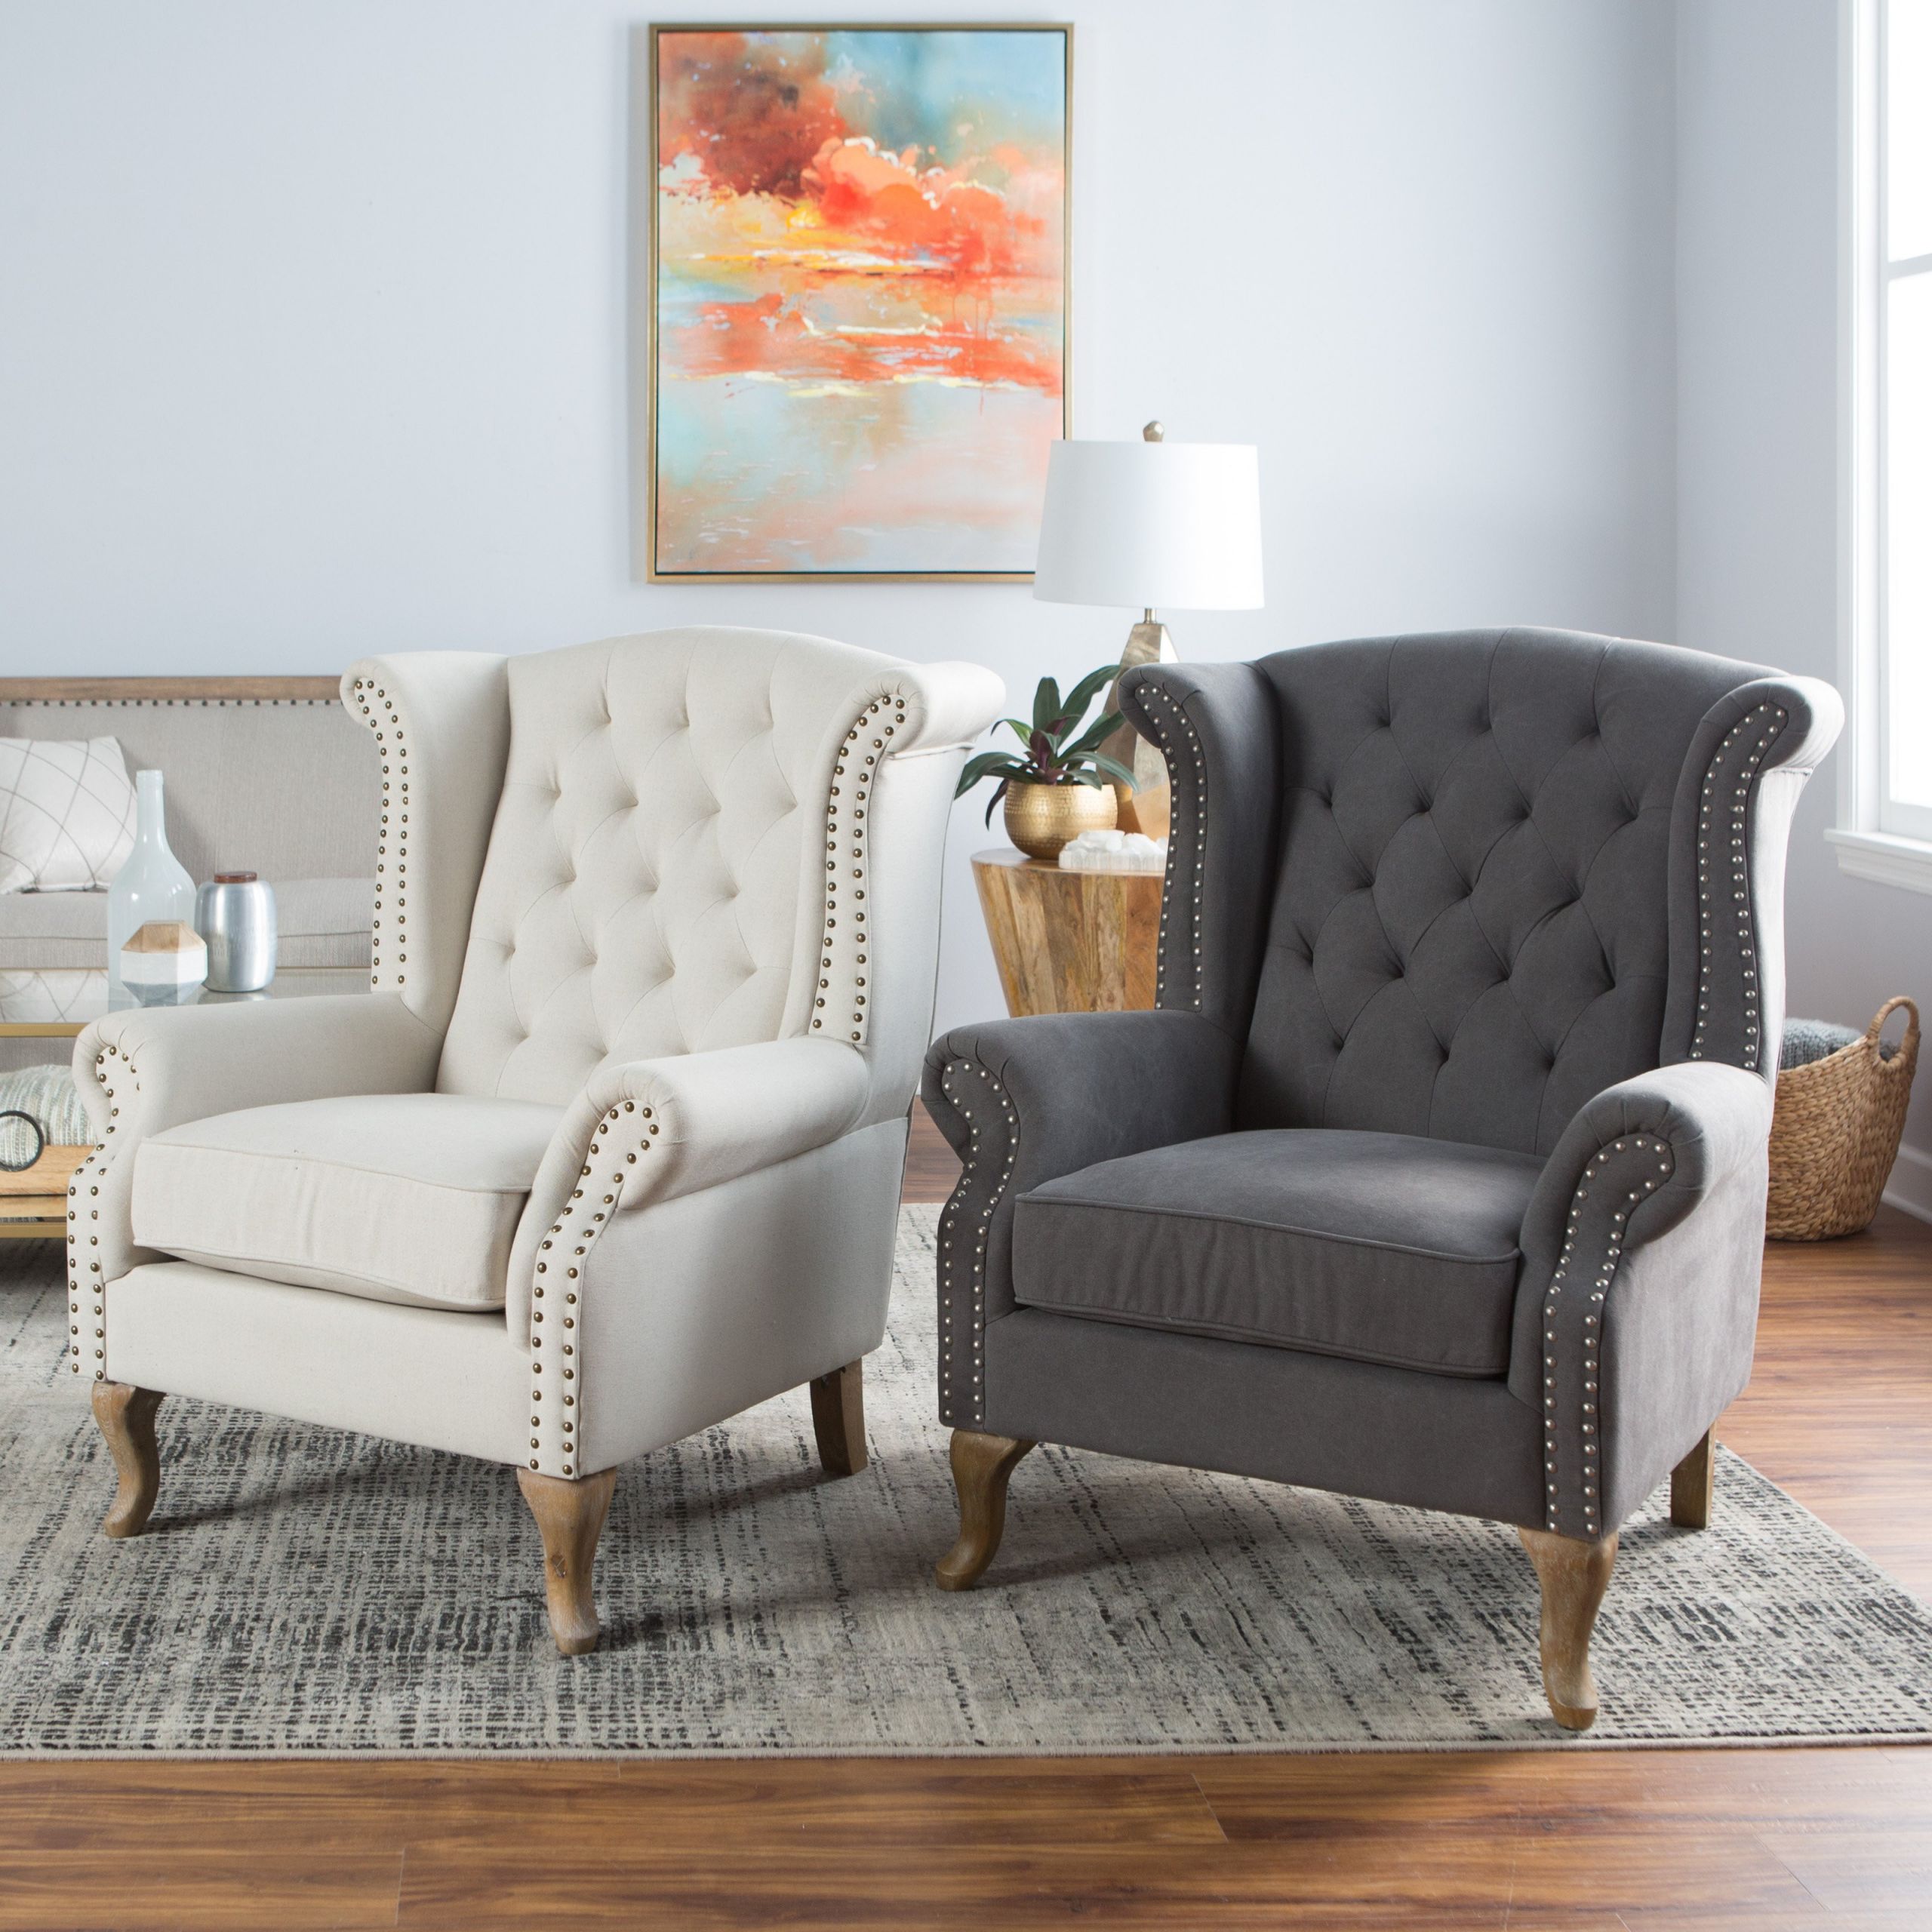 Accent Chairs Living Room
 5 Designs Accent Chairs For Your Living Room FIF Blog